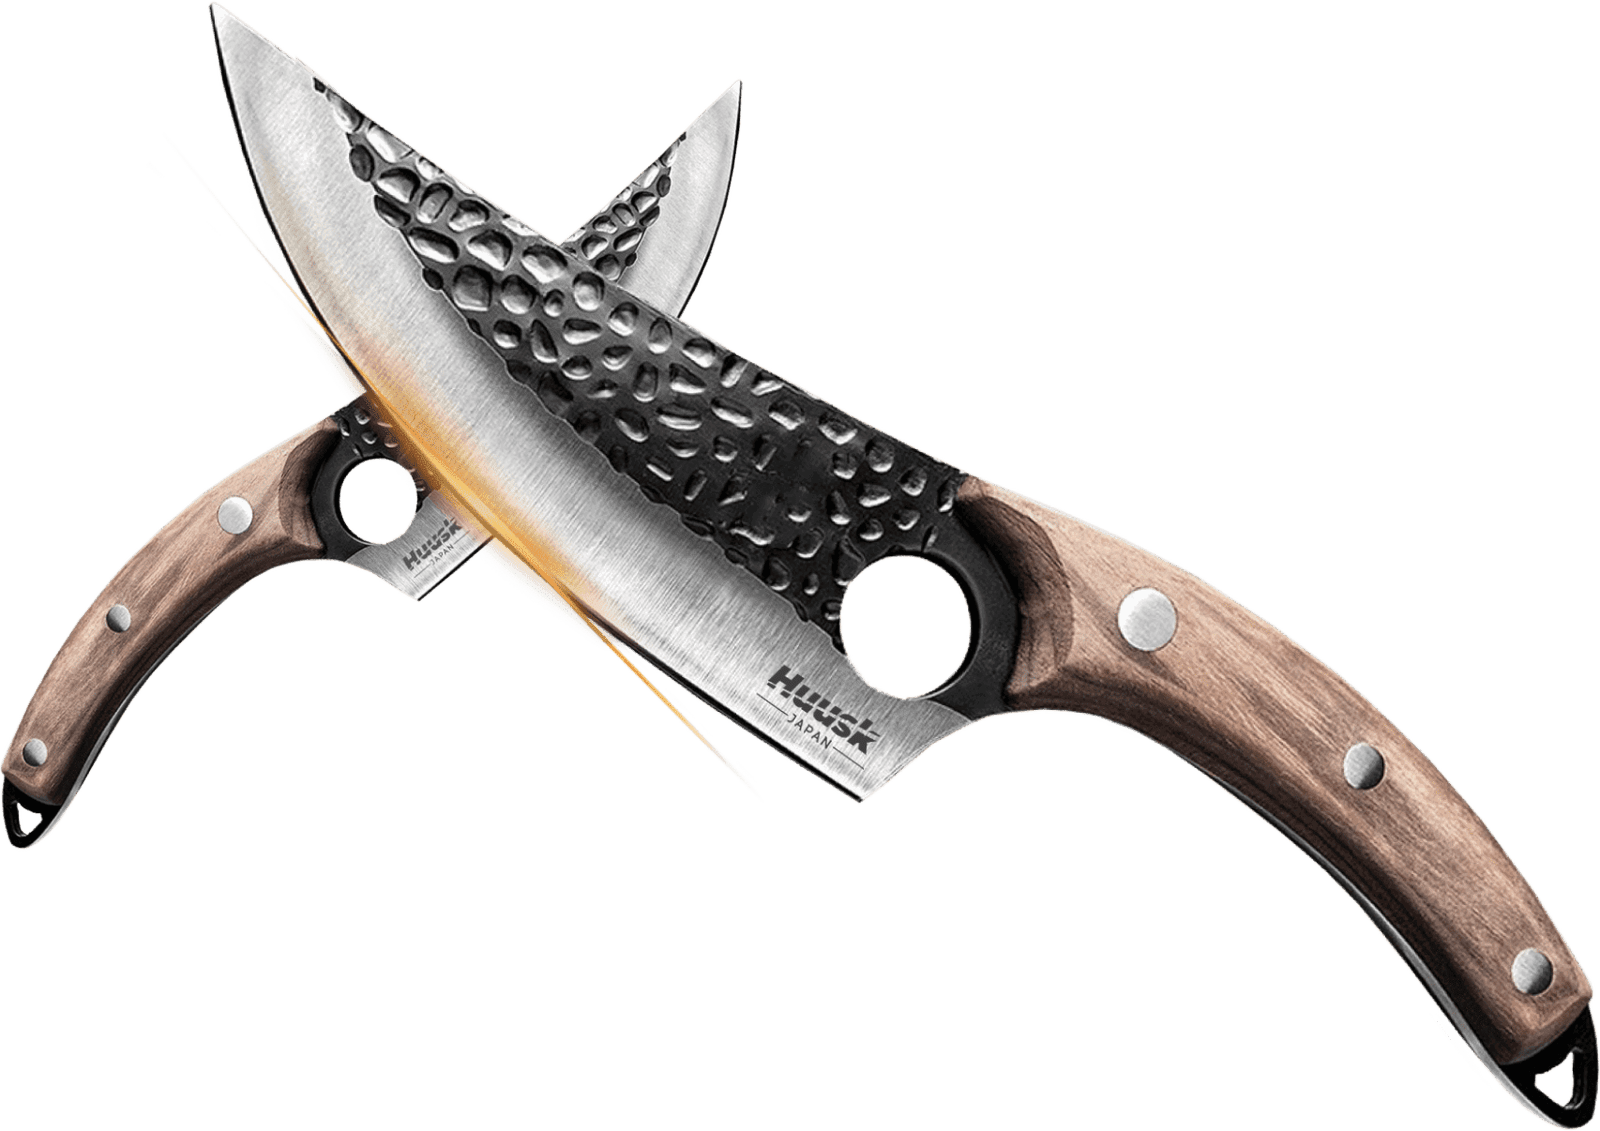 Is Huusk Knives Scam What’s the knife helpful to everyone?